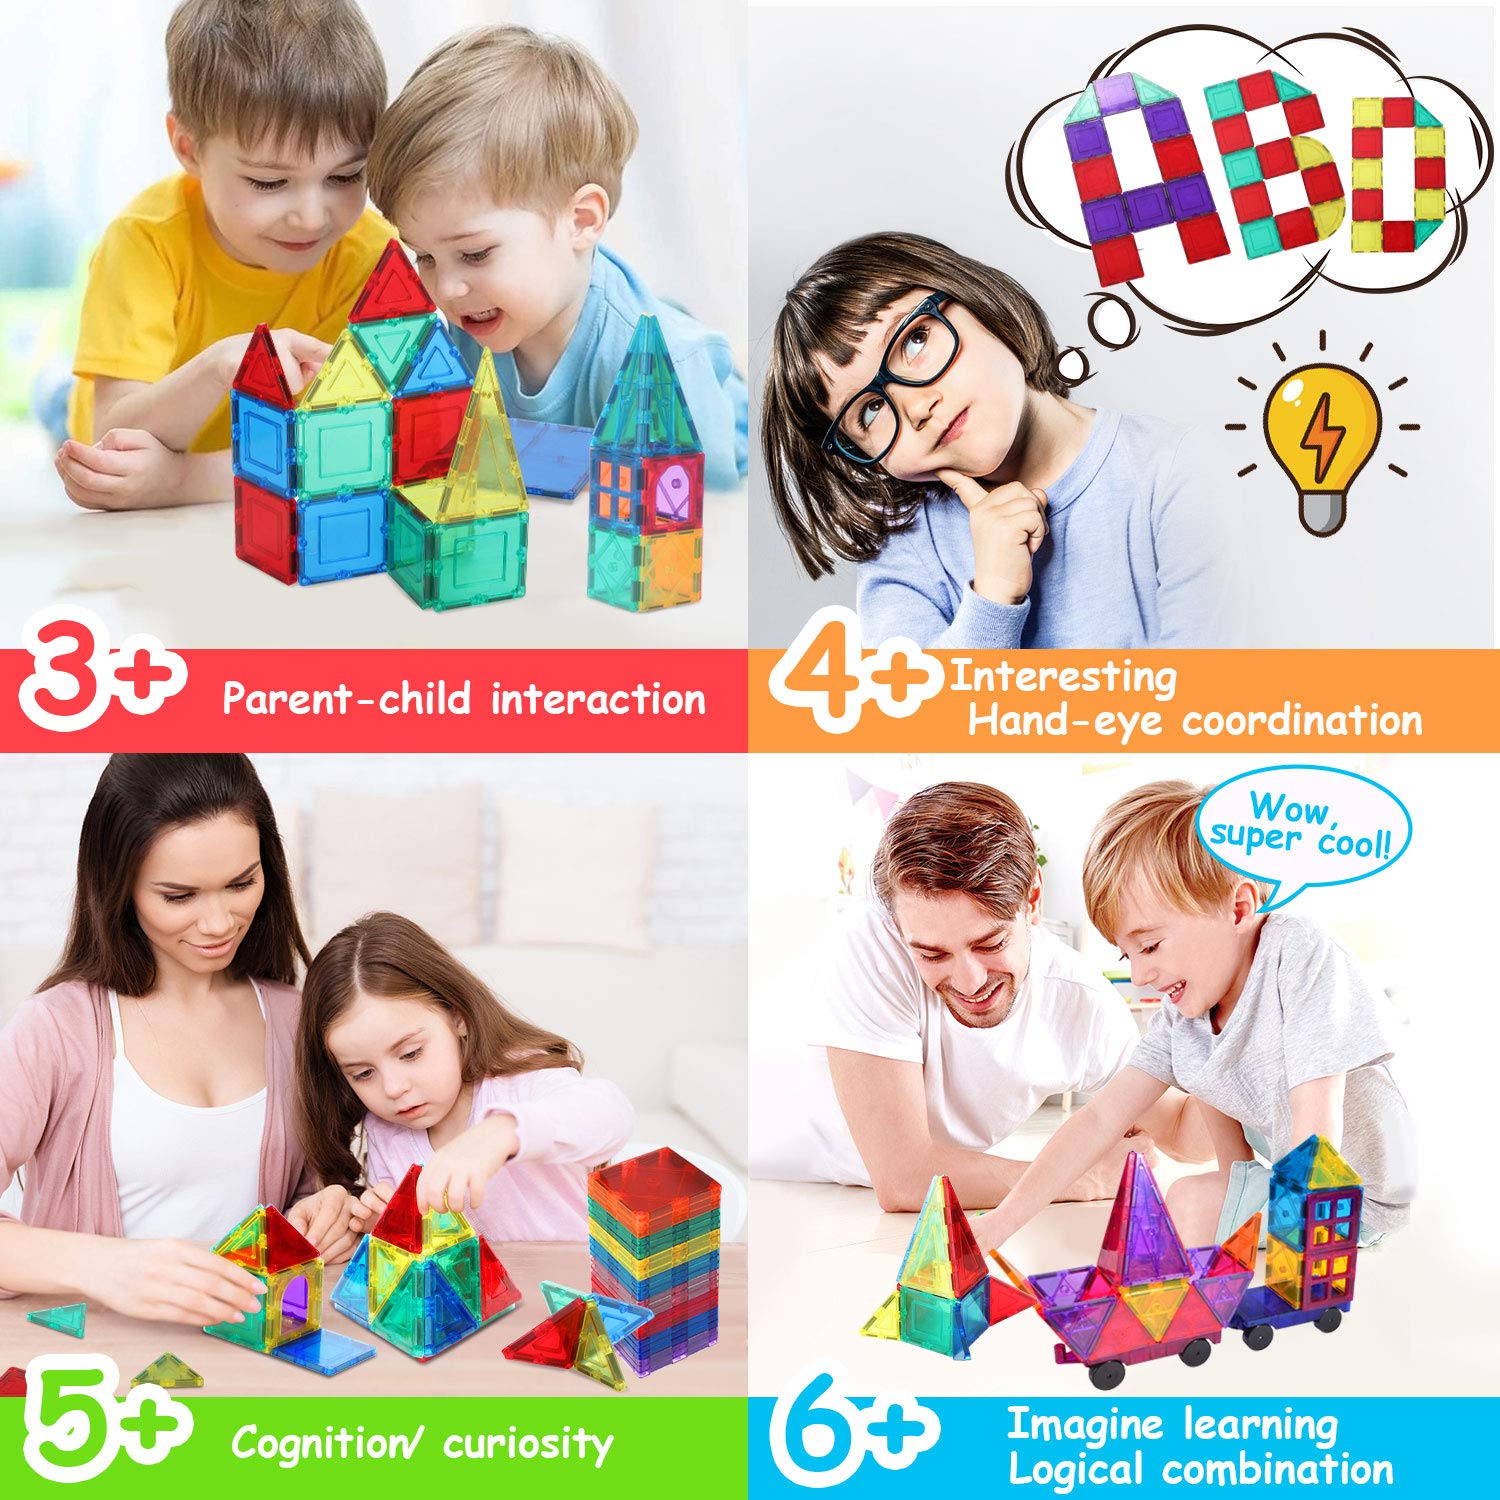 NVHH 100PCS Magnetic Tiles Oversize Magnetic Building Blocks for Kids Ages 4-8, Educational Construction Toys for Toddlers 3-5, Birthday Gifts Toys for 3 4 5 6 7 8+Year Old Boys Girls